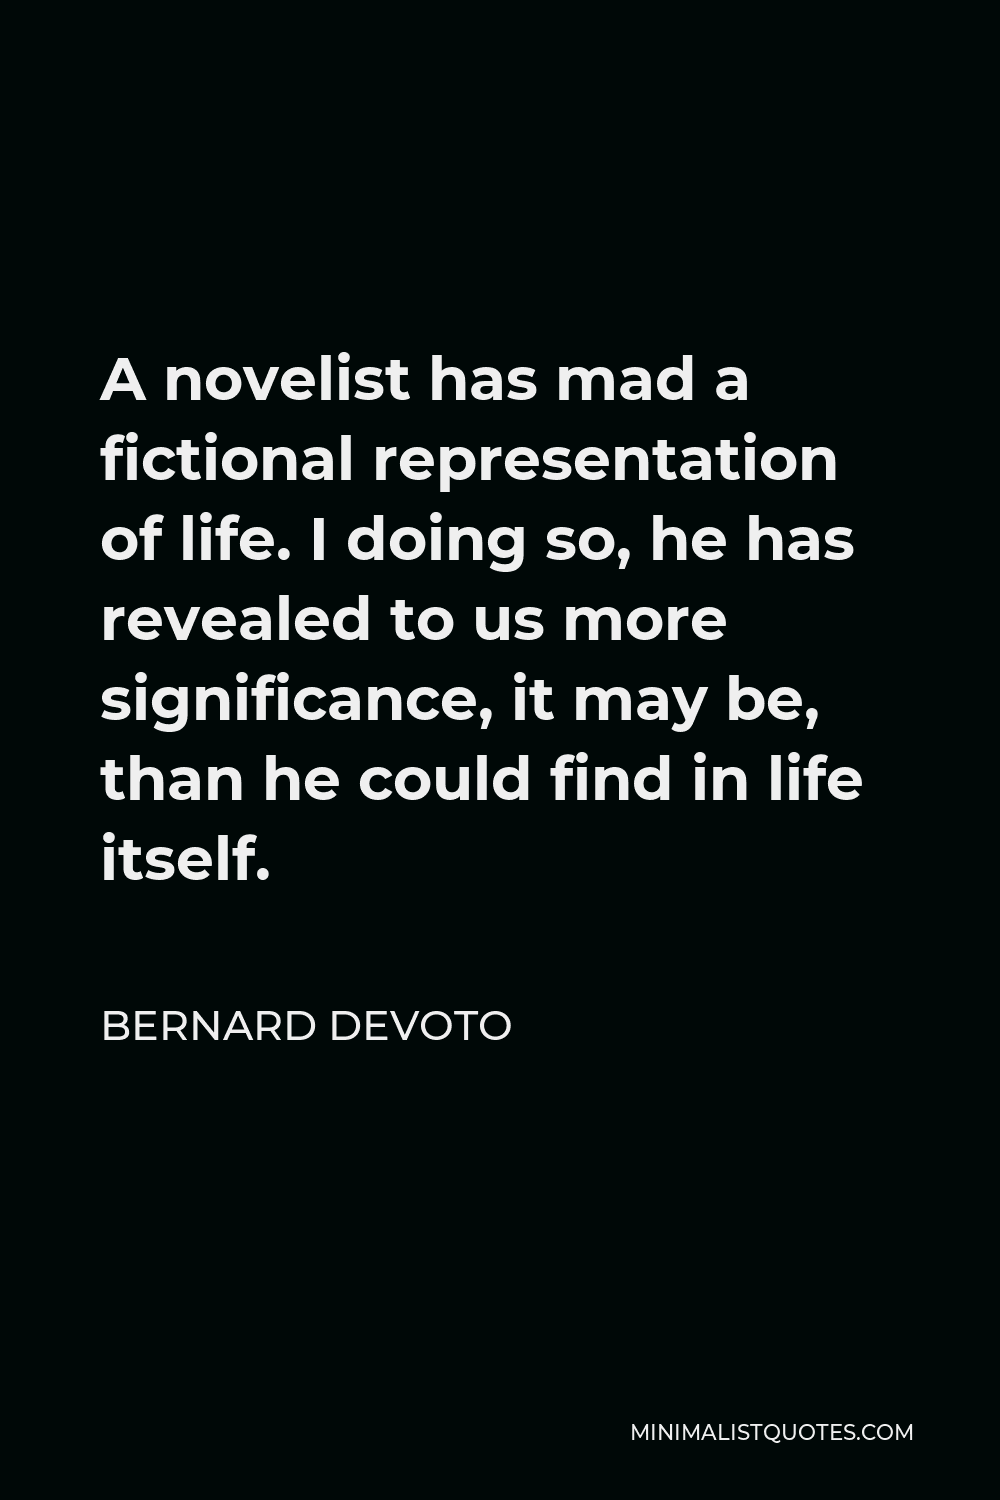 Bernard DeVoto Quote - A novelist has mad a fictional representation of life. I doing so, he has revealed to us more significance, it may be, than he could find in life itself.